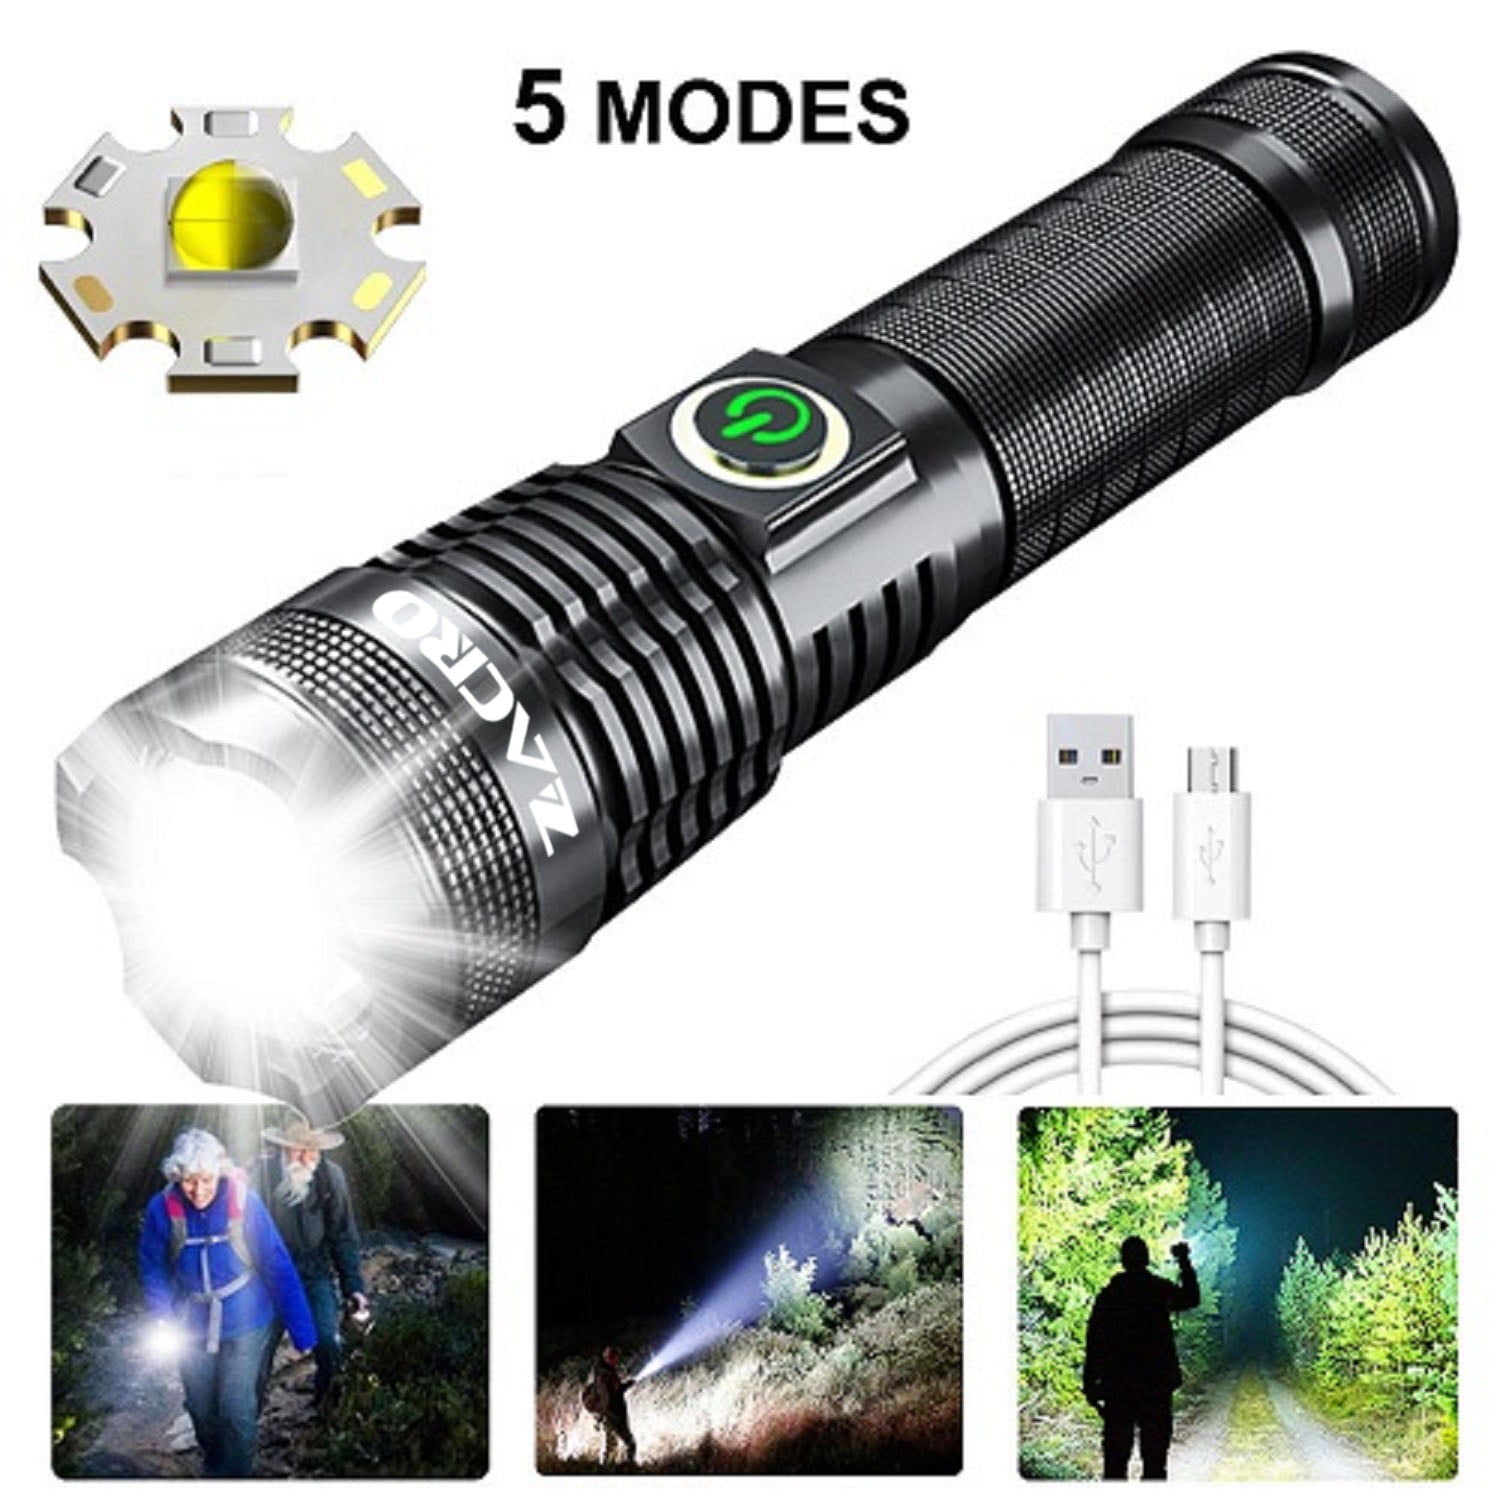 Is 100000 lumens bright for a flashlight?